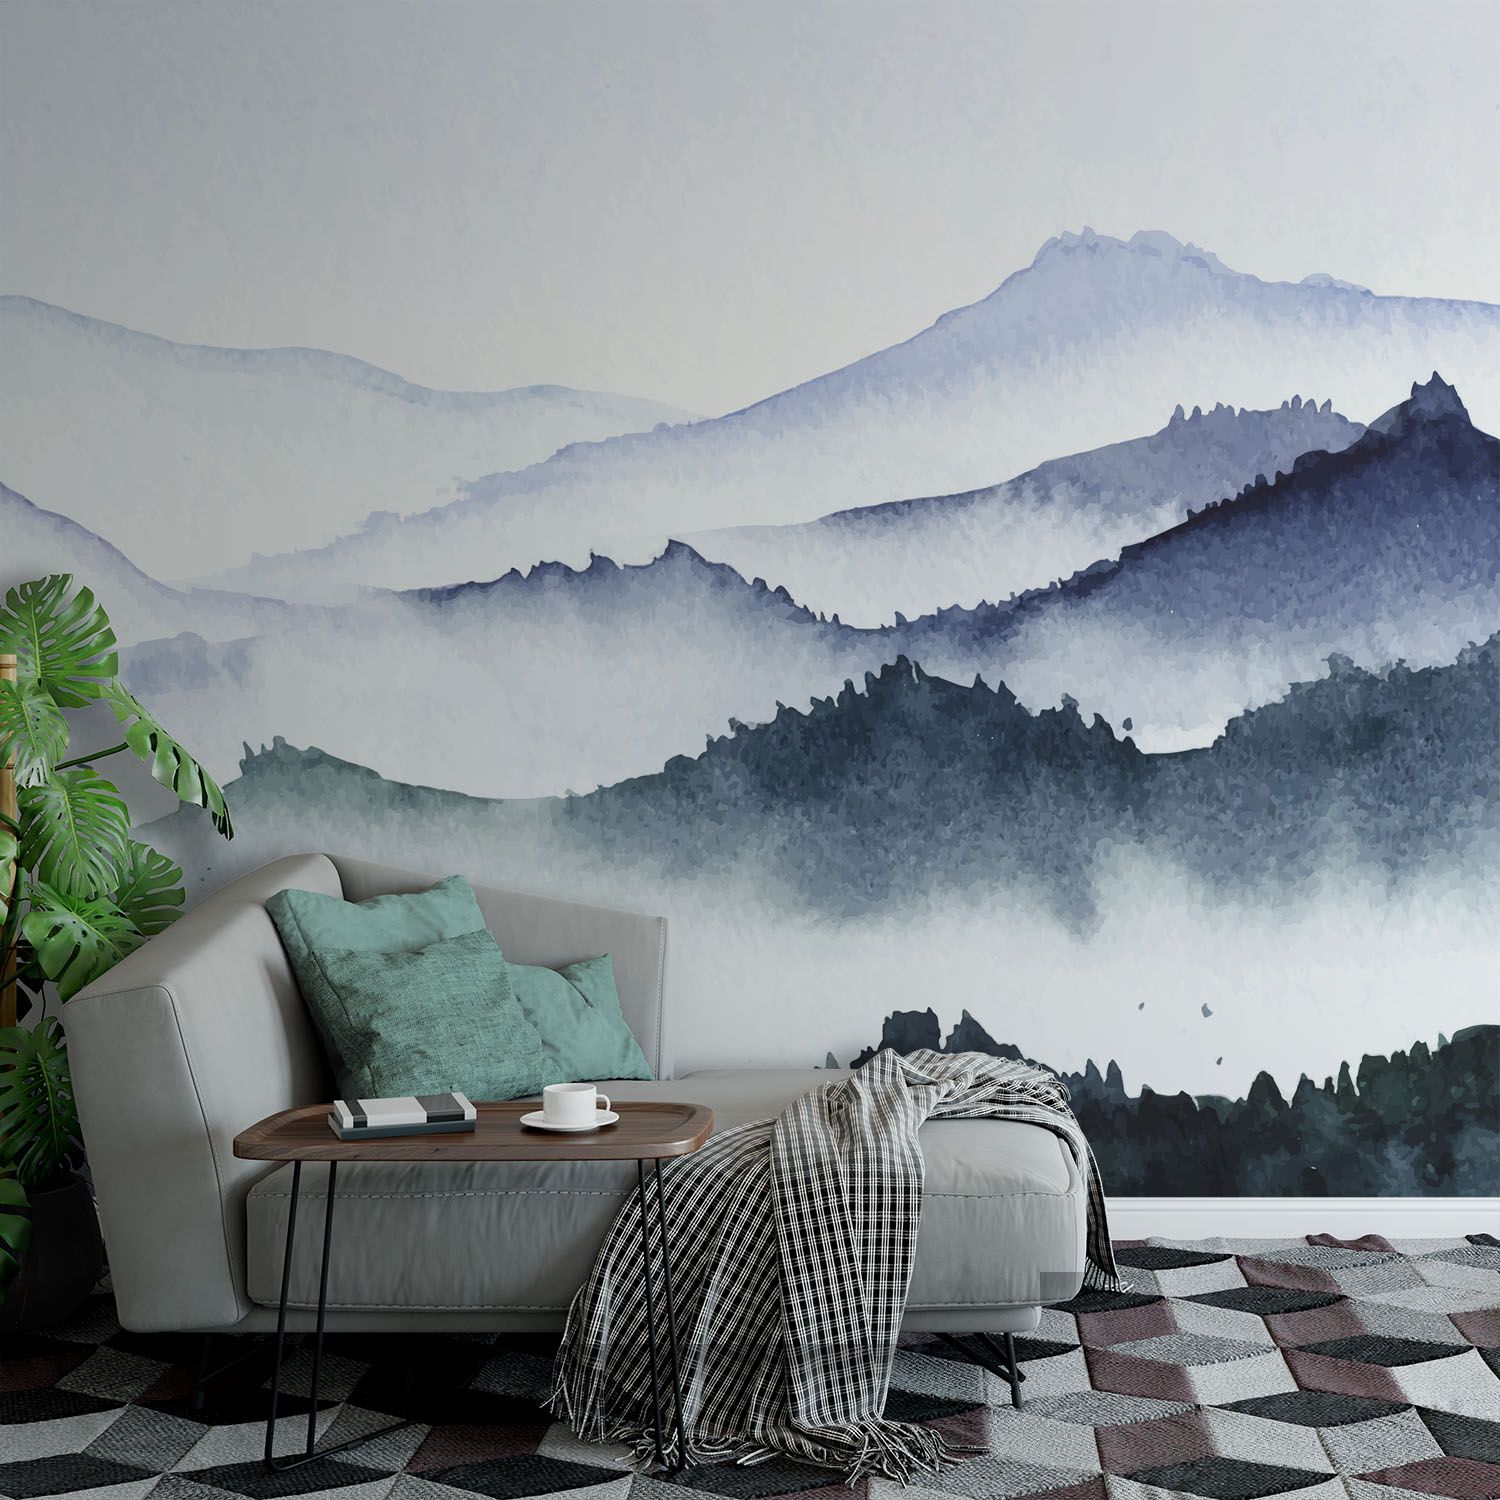 Fogs Between Mountains – Wall Mural, Pvc Free Wall Covering – Wall Murals,  Wall Paper Decor, Home Decor – Bestofbharat For Mountains In The Fog Wall Art (View 13 of 15)